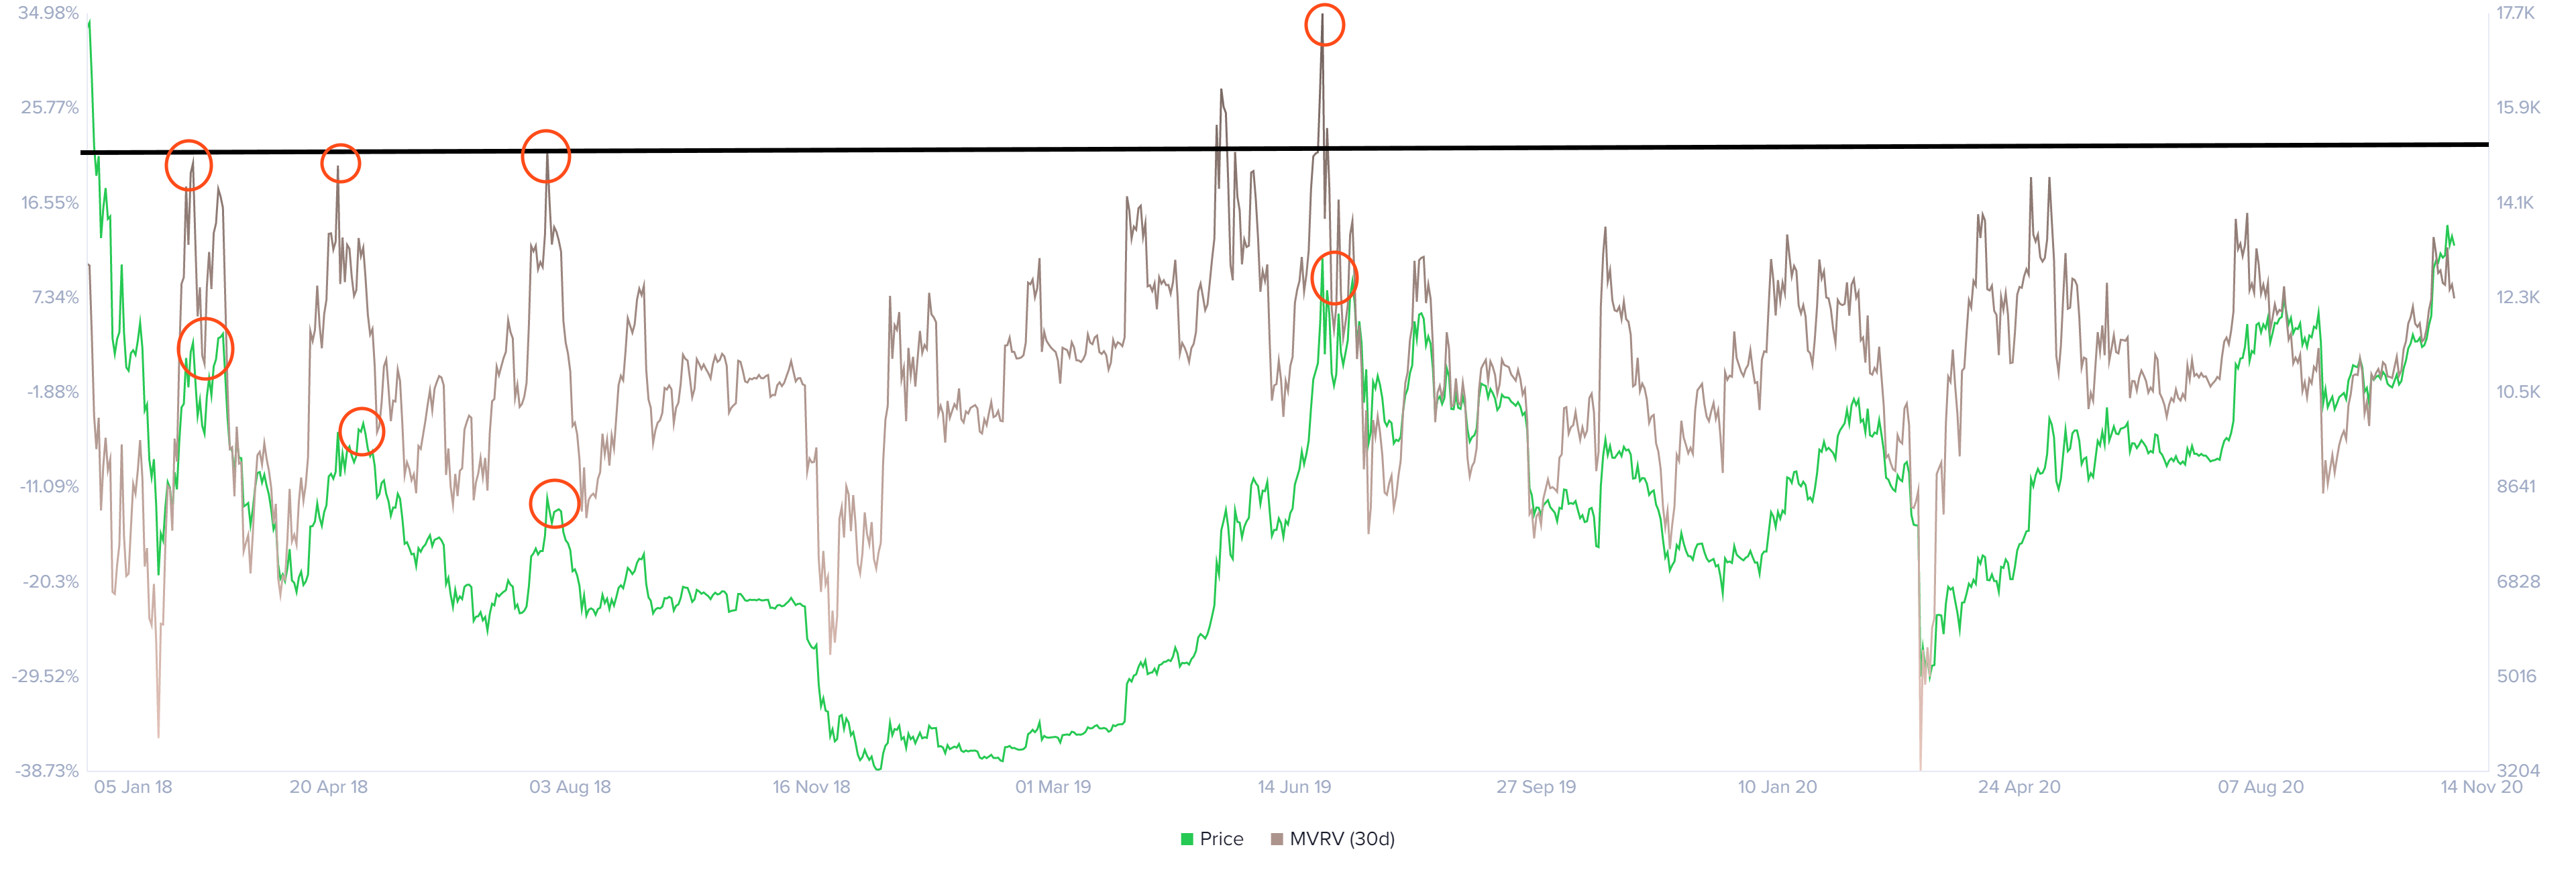 Bitcoin Price Prediction 2021 January / Bitcoin Forecast 2019 2020 And 2021 Europa Mooon For Bitfinex Btcusd By D4rkenergy Tradingview - Visit previsionibitcoin for today listings, monthly and long term forecasts about altcoins and cryptocurrencies ➤.